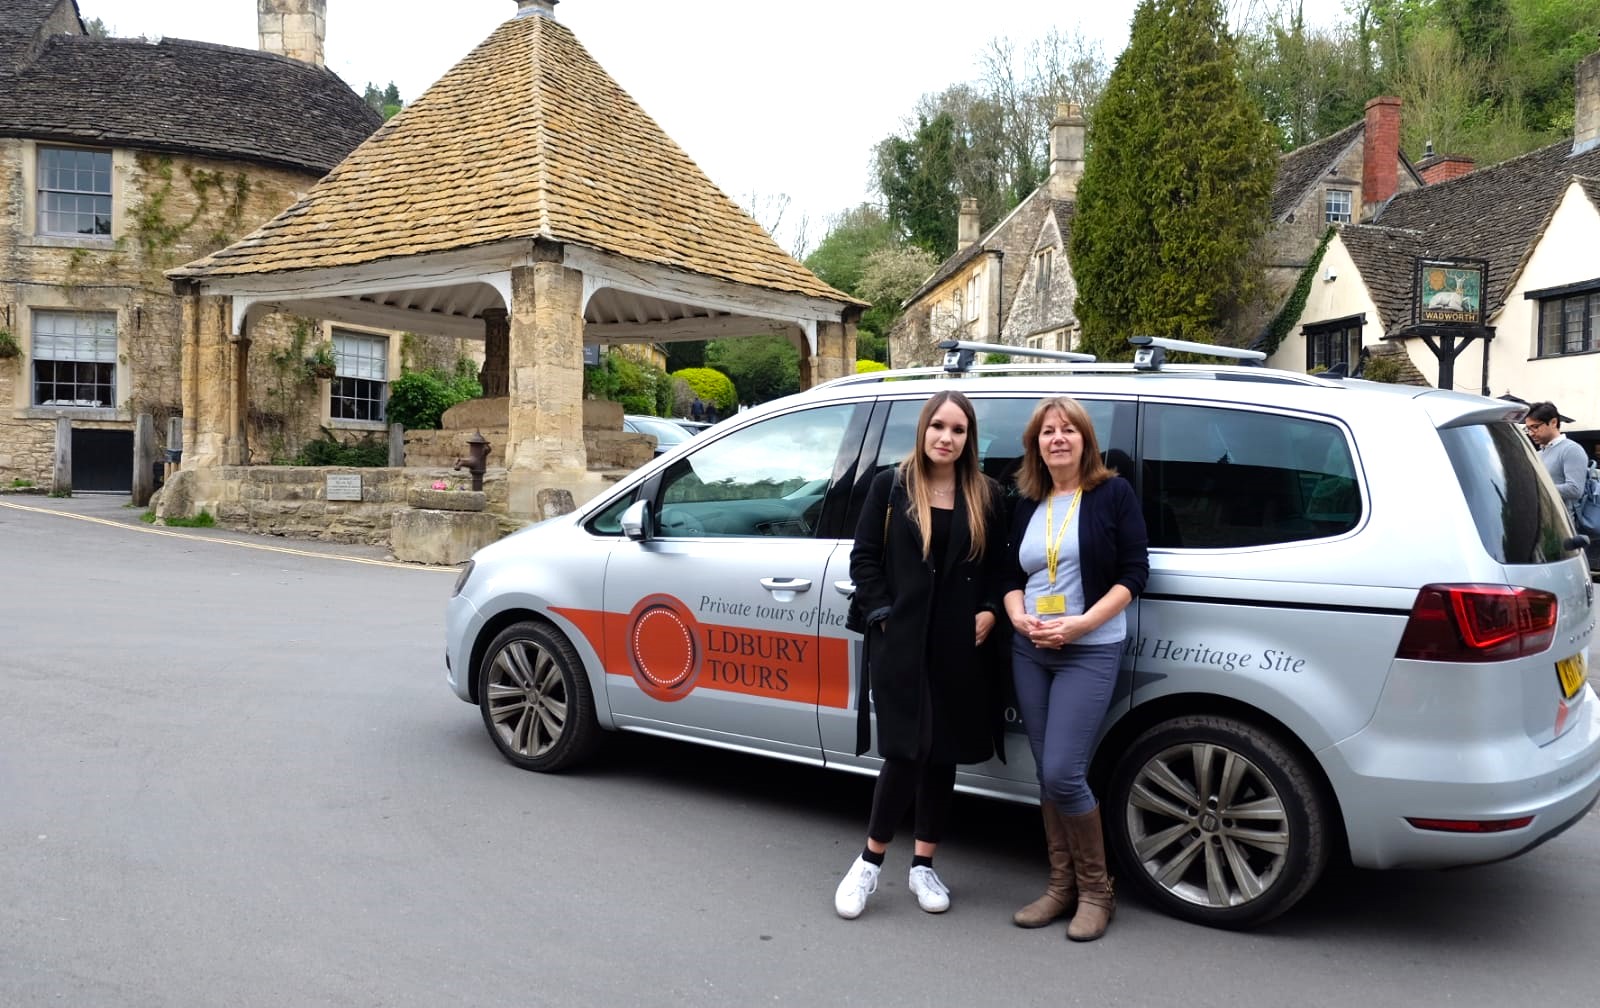 Oldbury Tours guide Kerry in Castle Combe